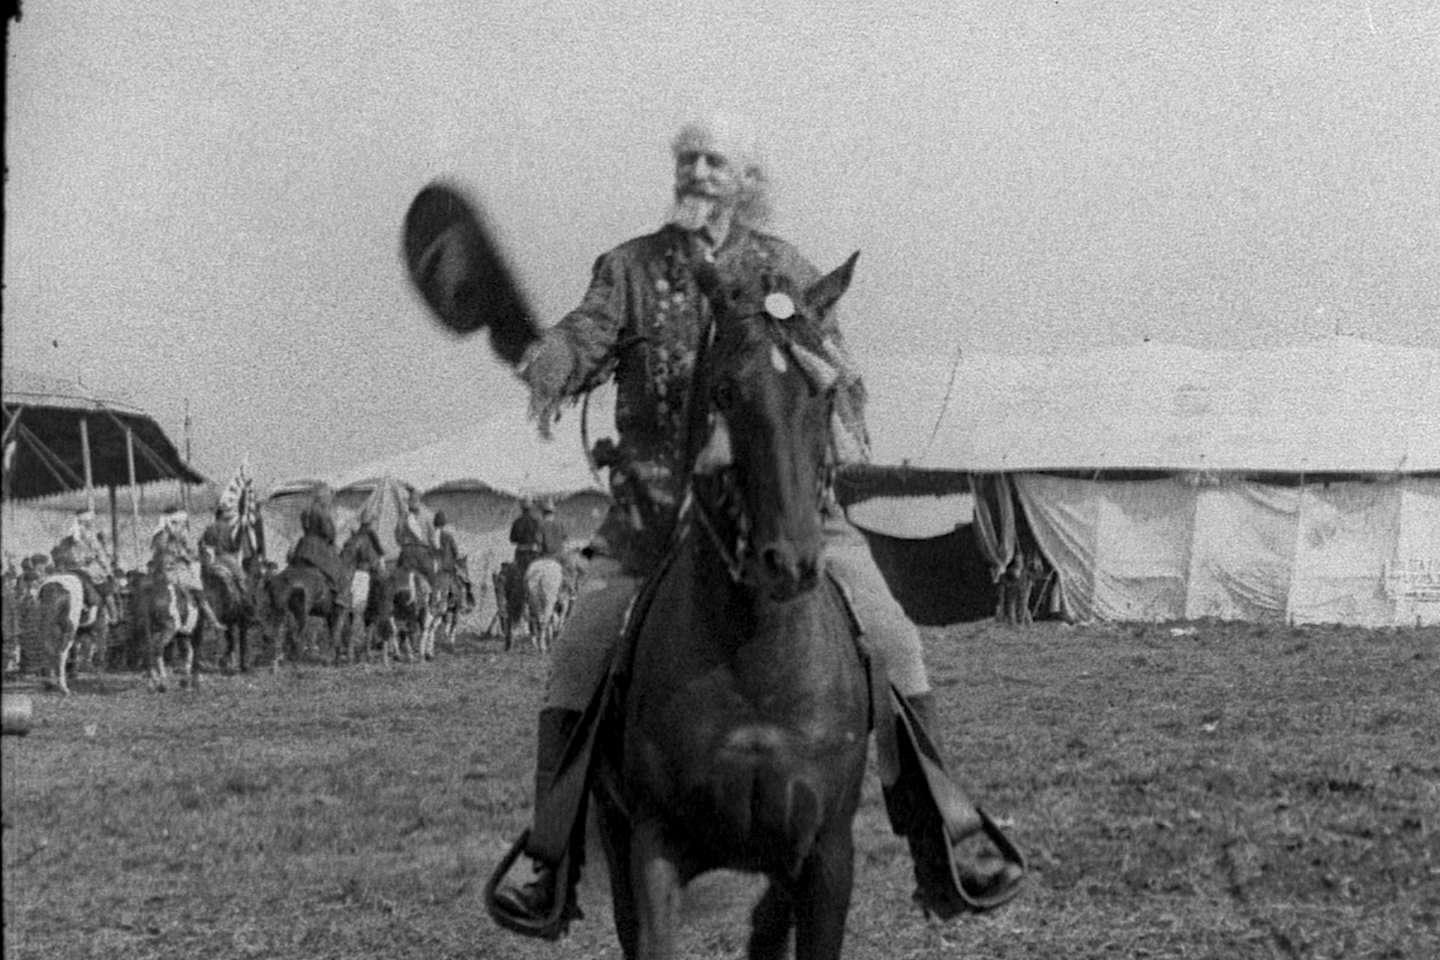 “Buffalo Bill, let’s show off!”  », on France 5: bison hunt, stagecoach attack and real Indians to celebrate the conquest of the West